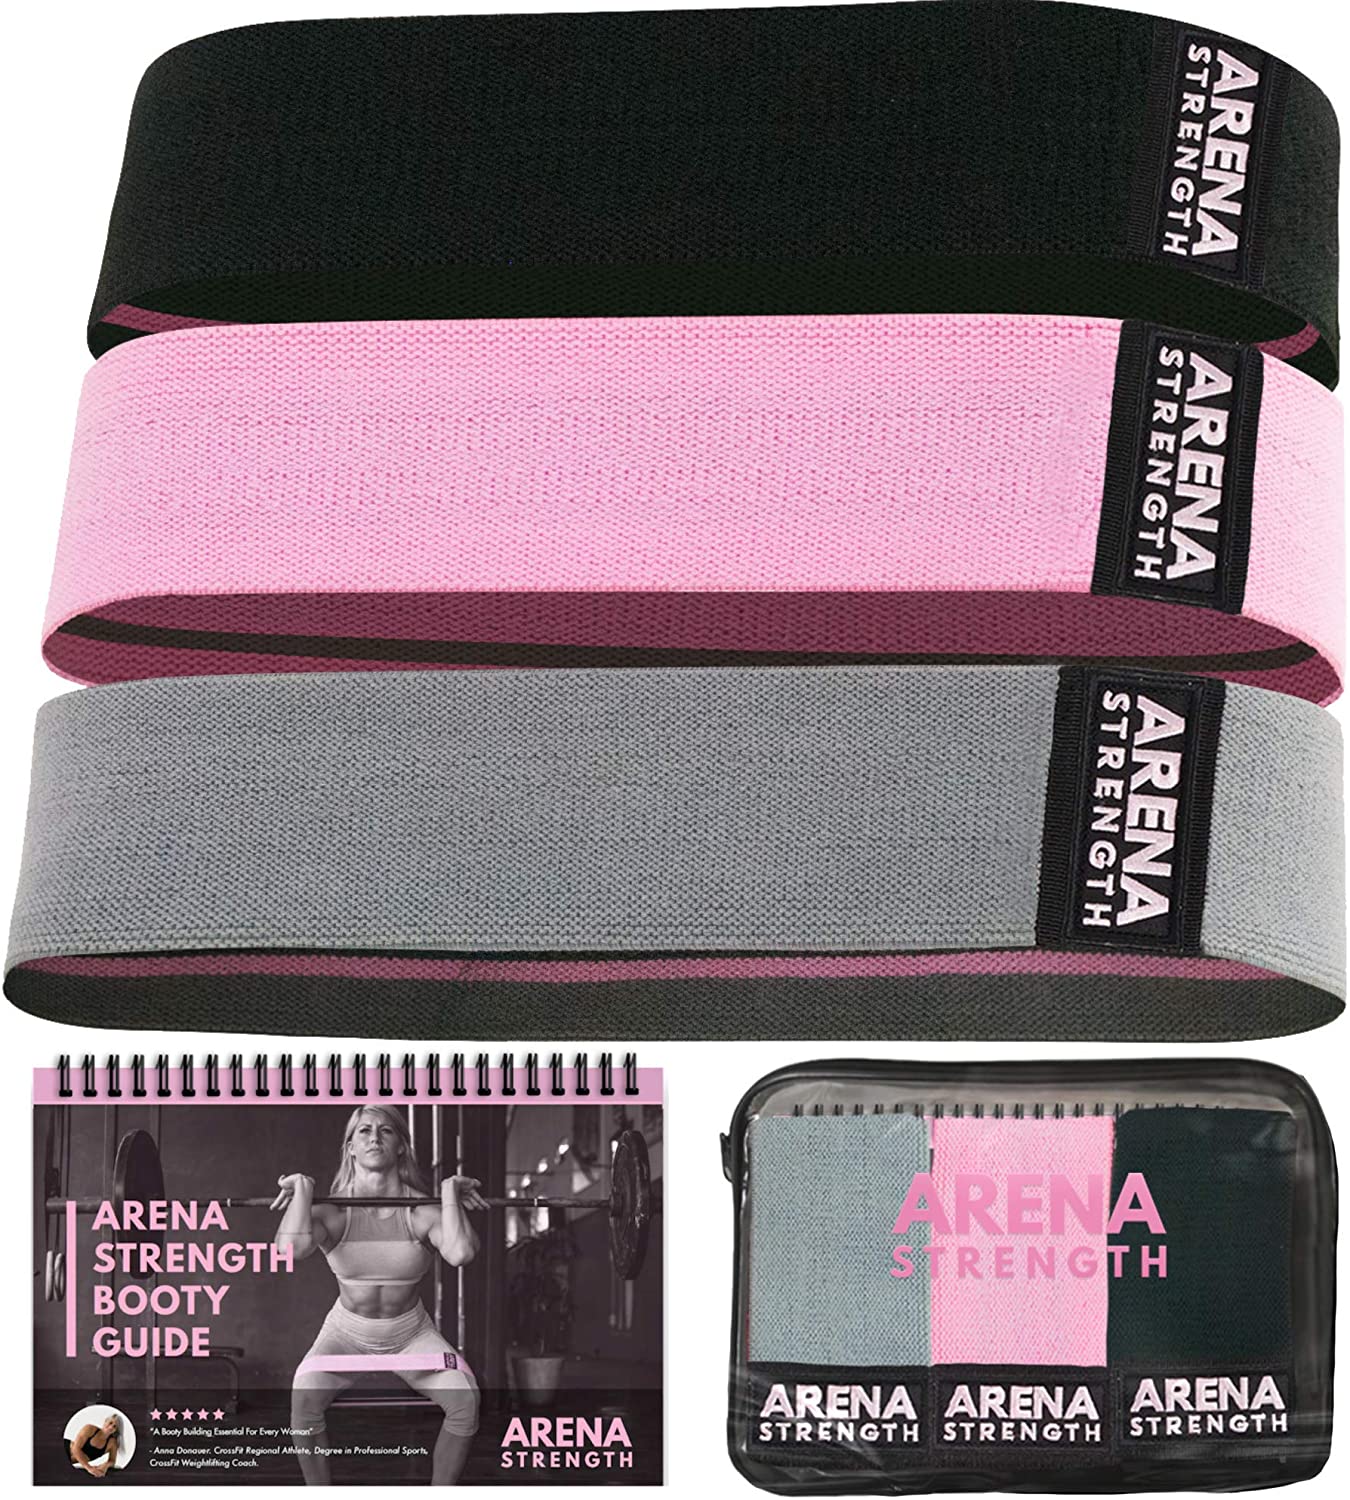 Arena Non-Slip Glute Resistance Booty Bands, 3-Pack